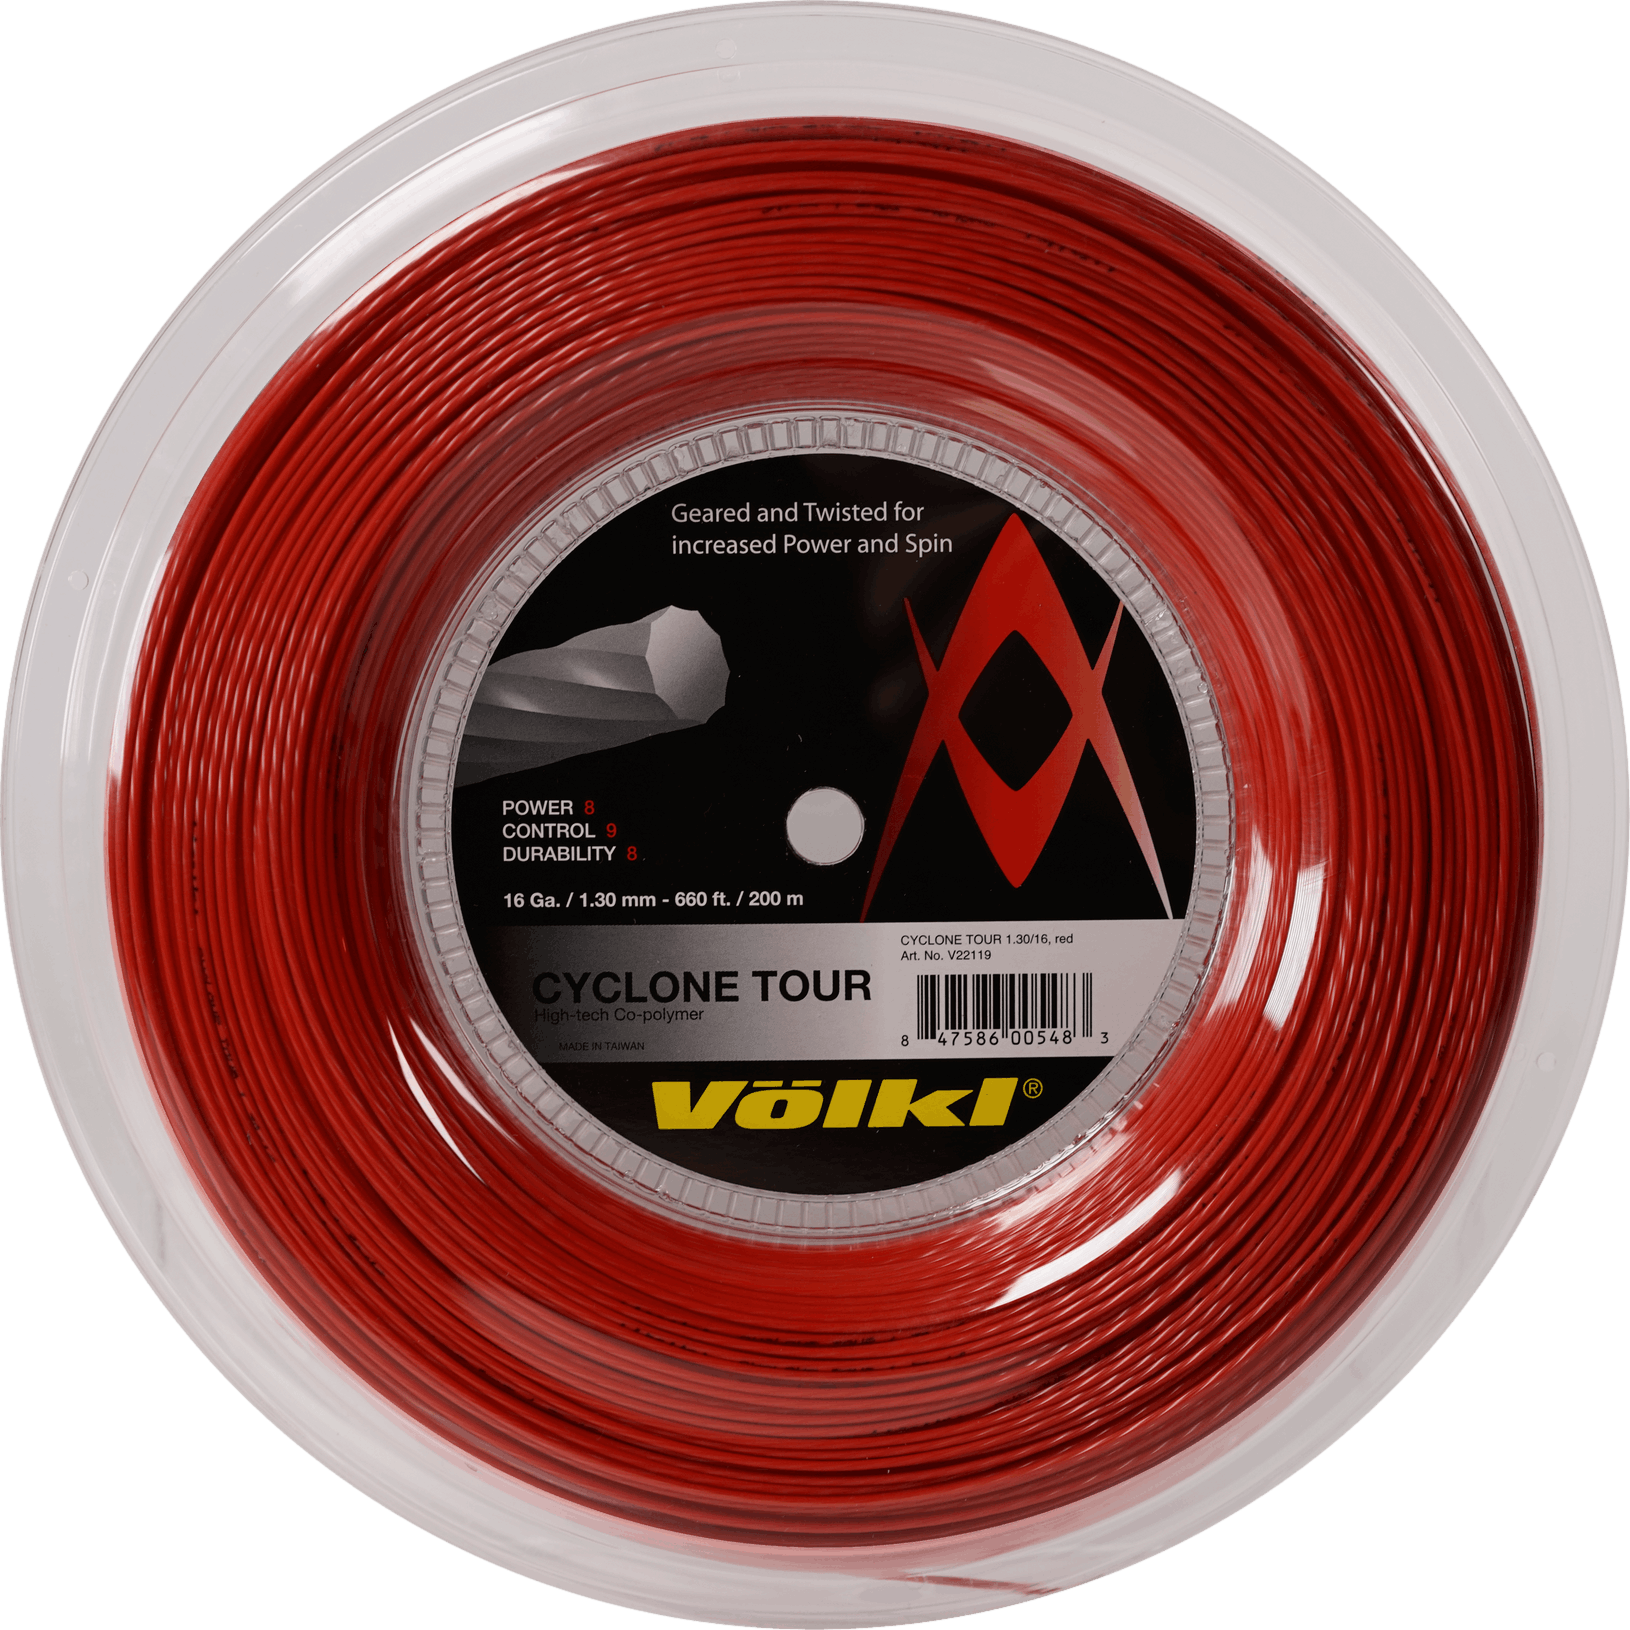 Volkl Cyclone Tour String Reel · 16g · Red